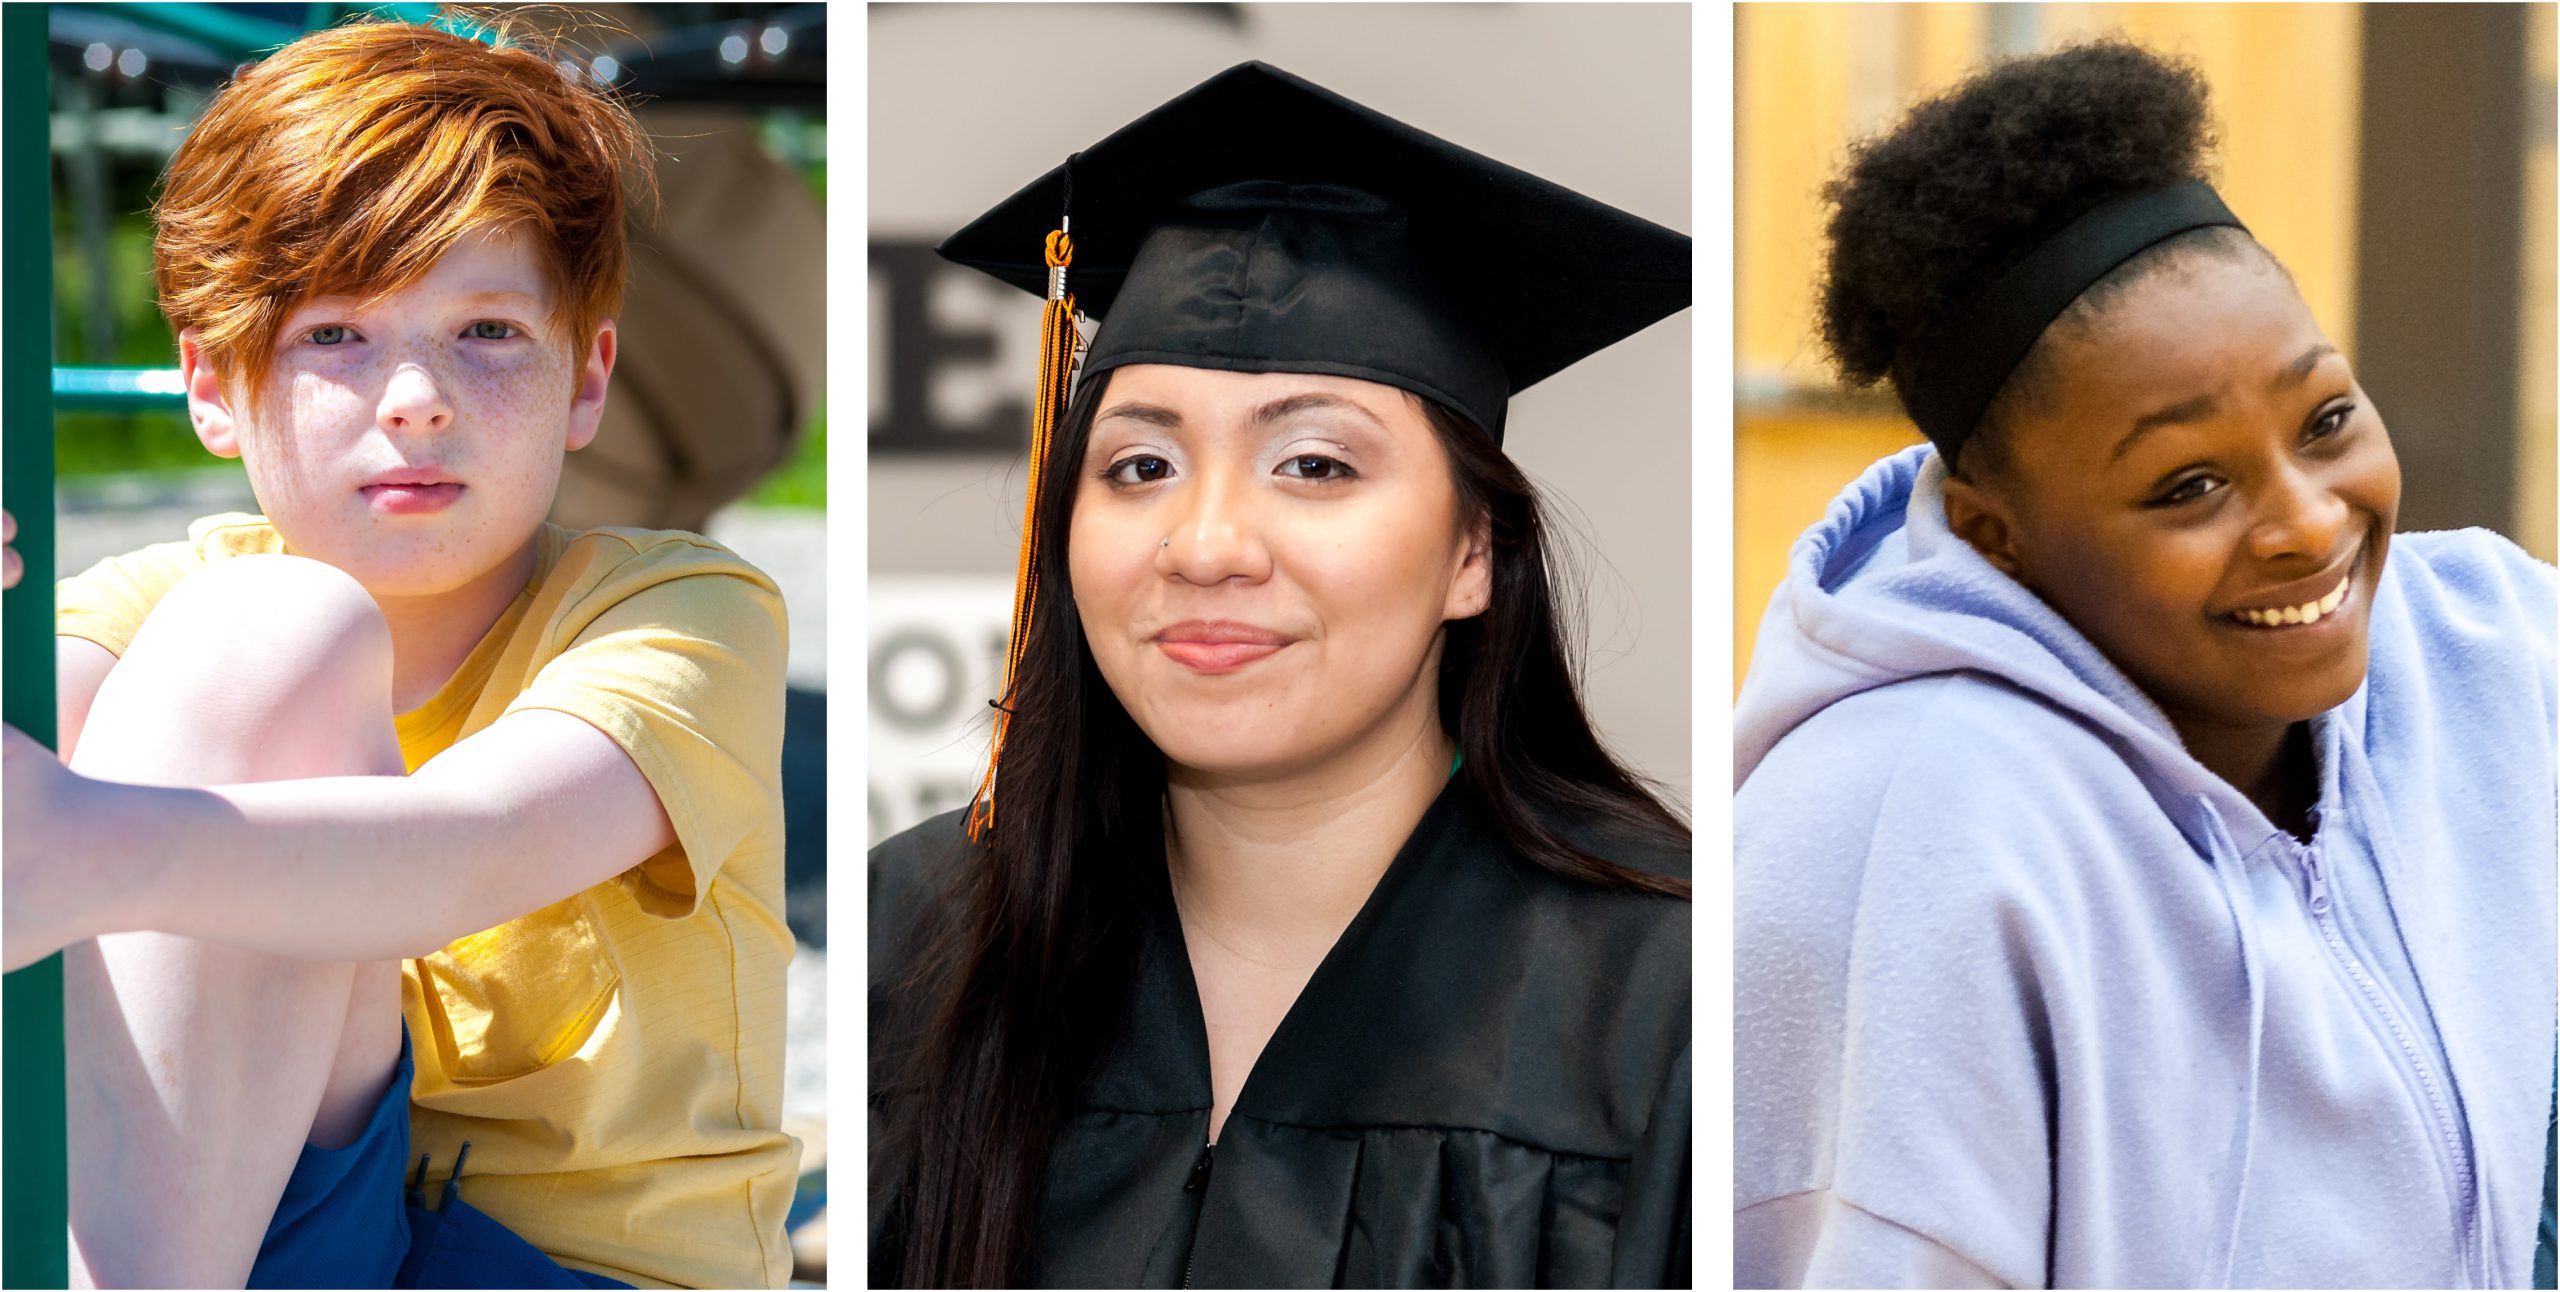 3 local area students: a young boy in a yellow shirt, a high school graduate in her cap and gown, a middle school girl smiling in a purple sweatshirt